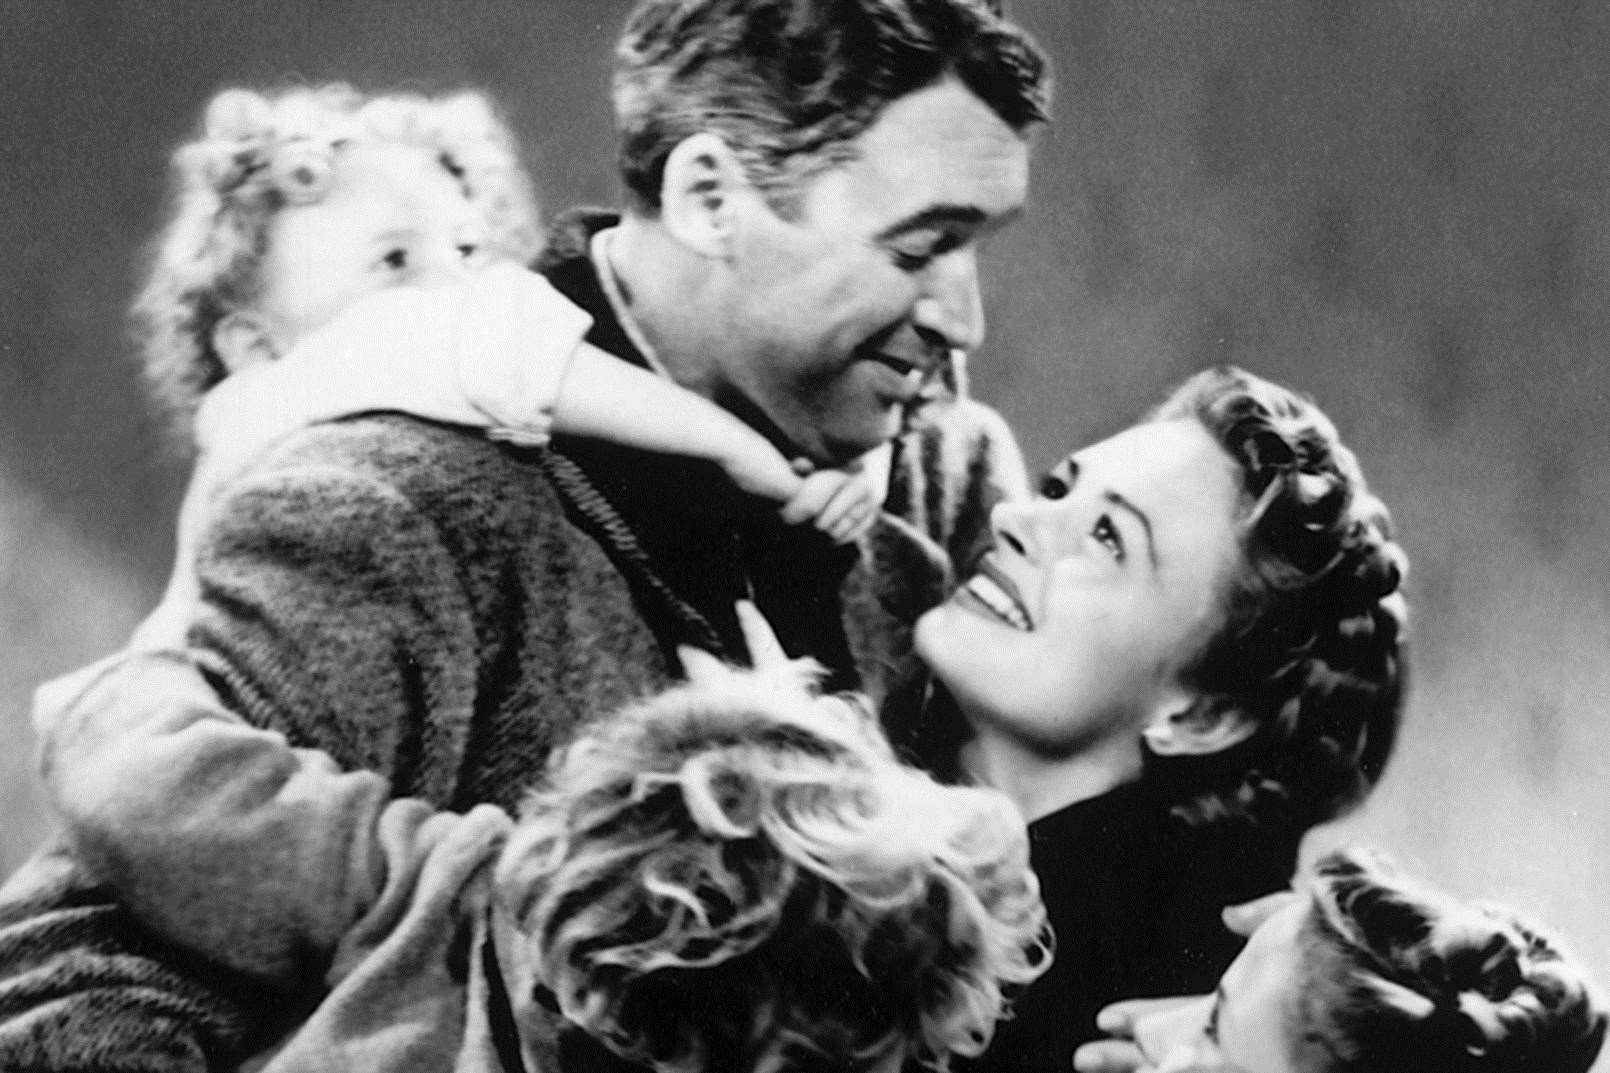 The classic Christmas film It's a Wonderful Life will be at the Gulbenkian in Canterbury